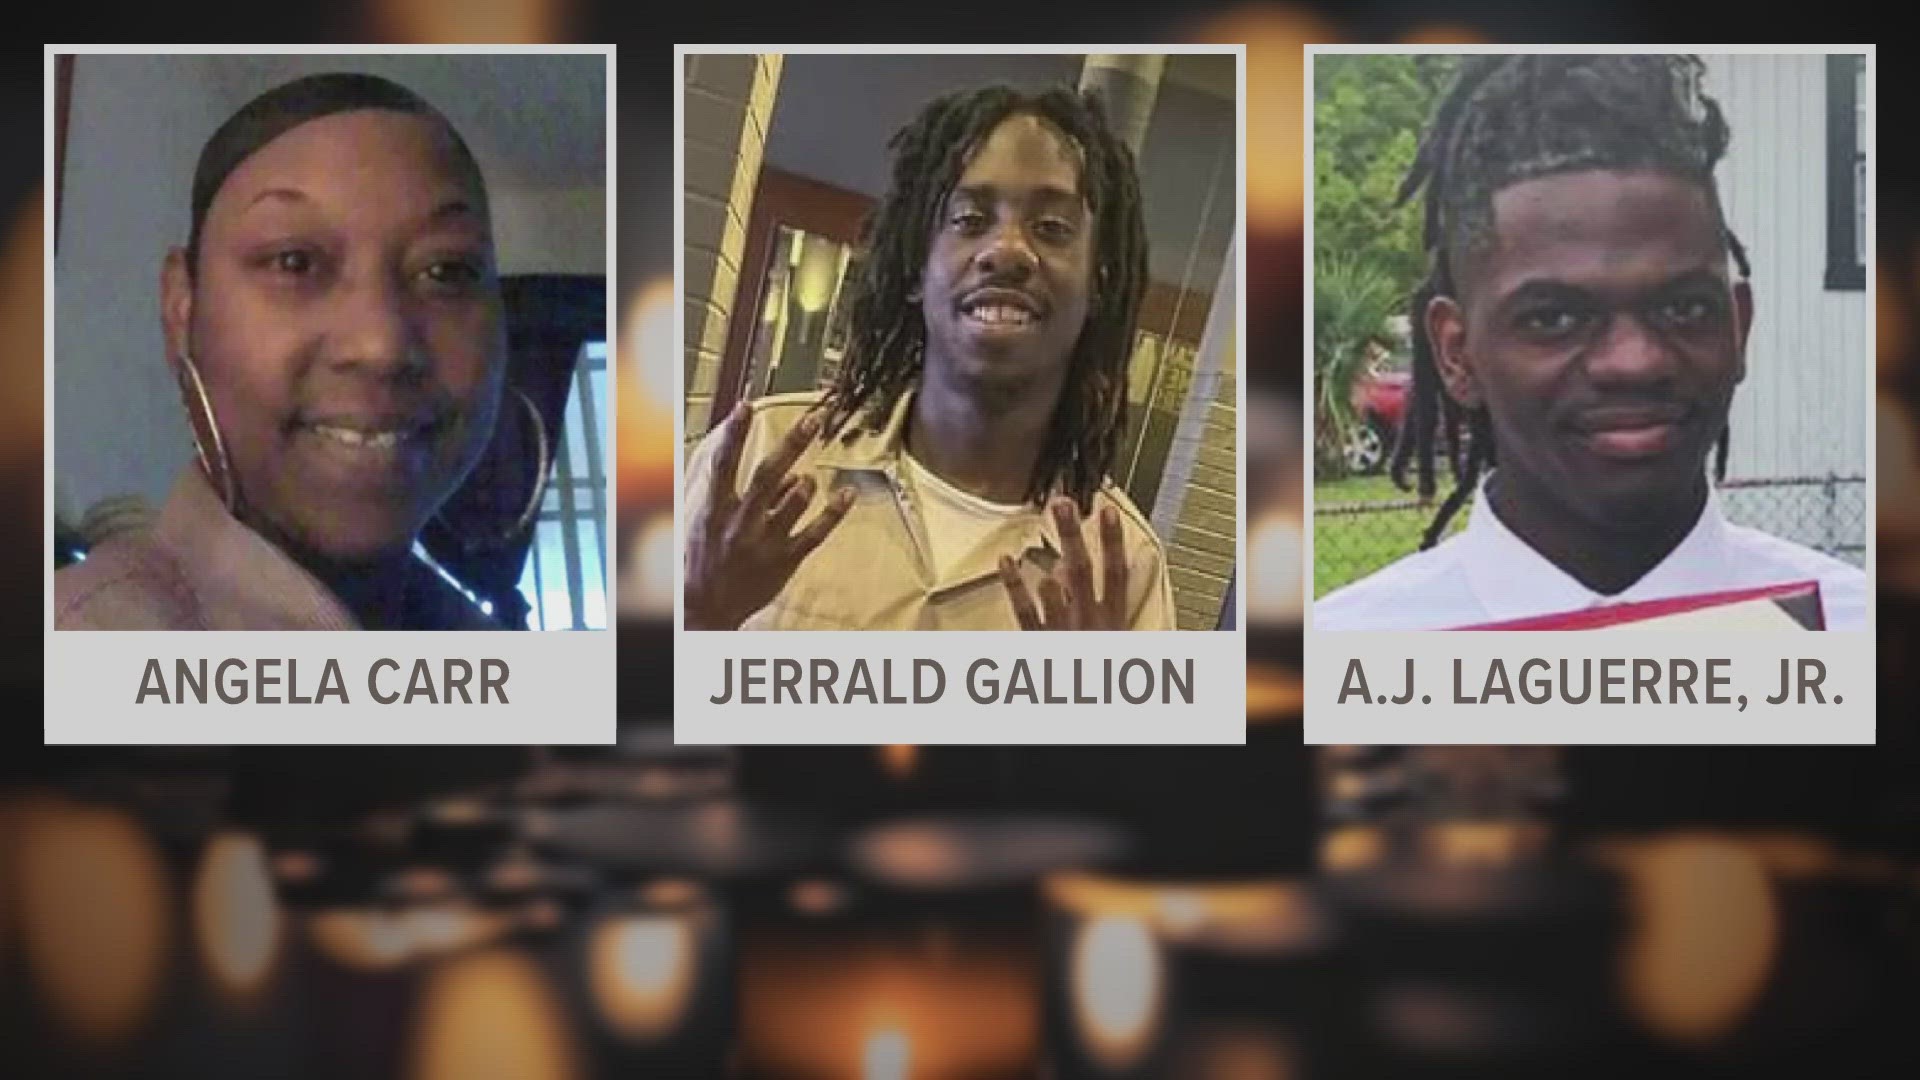 The three lives taken Saturday included 52-year-old Angela Carr, 19-year-old Anotl Joseph Laguerre Jr., and 29-year-old Jerrald De'Shaun Gallion.